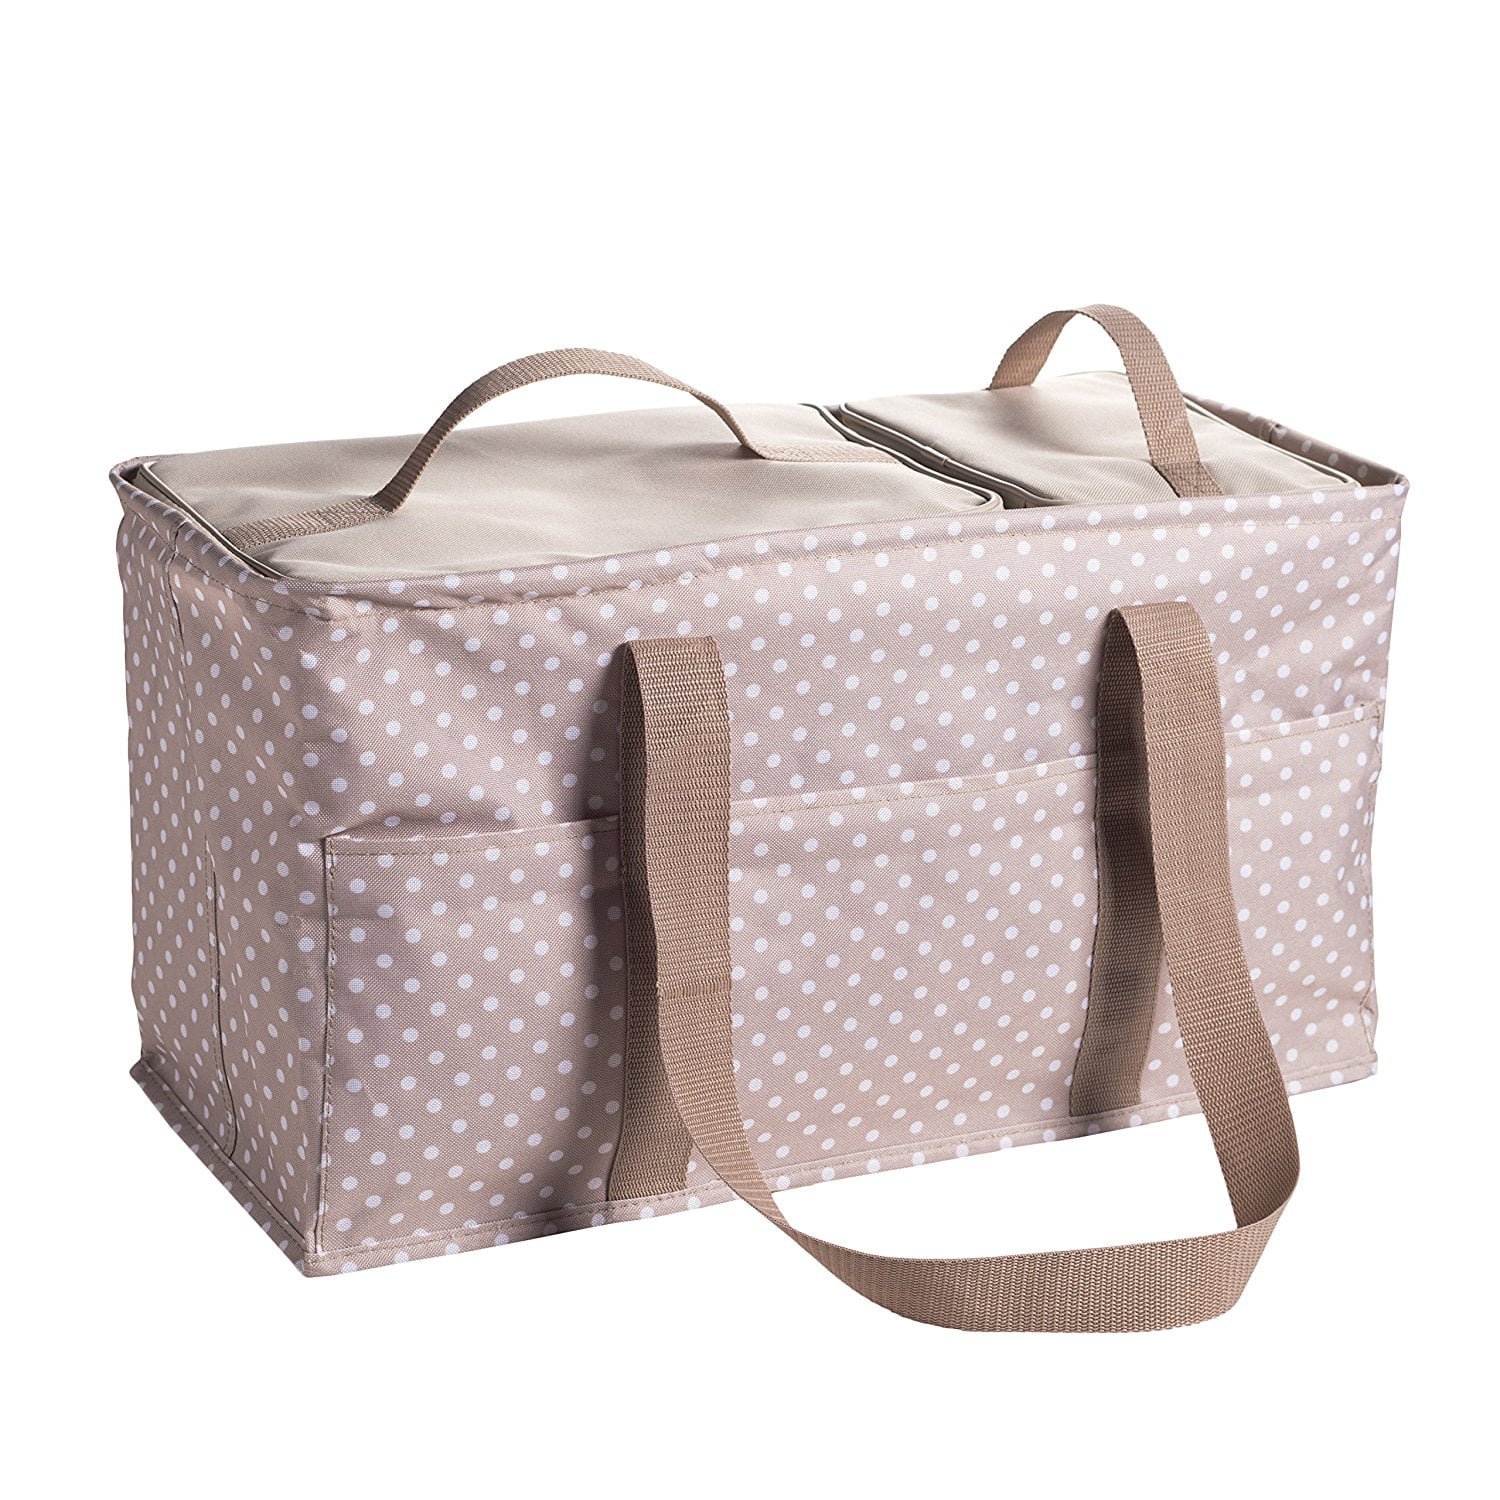 Large Utility Tote Bag With Handles, 2 Zippered Coolers, Heavy Duty Fabric - Beach Picnic Basket ...